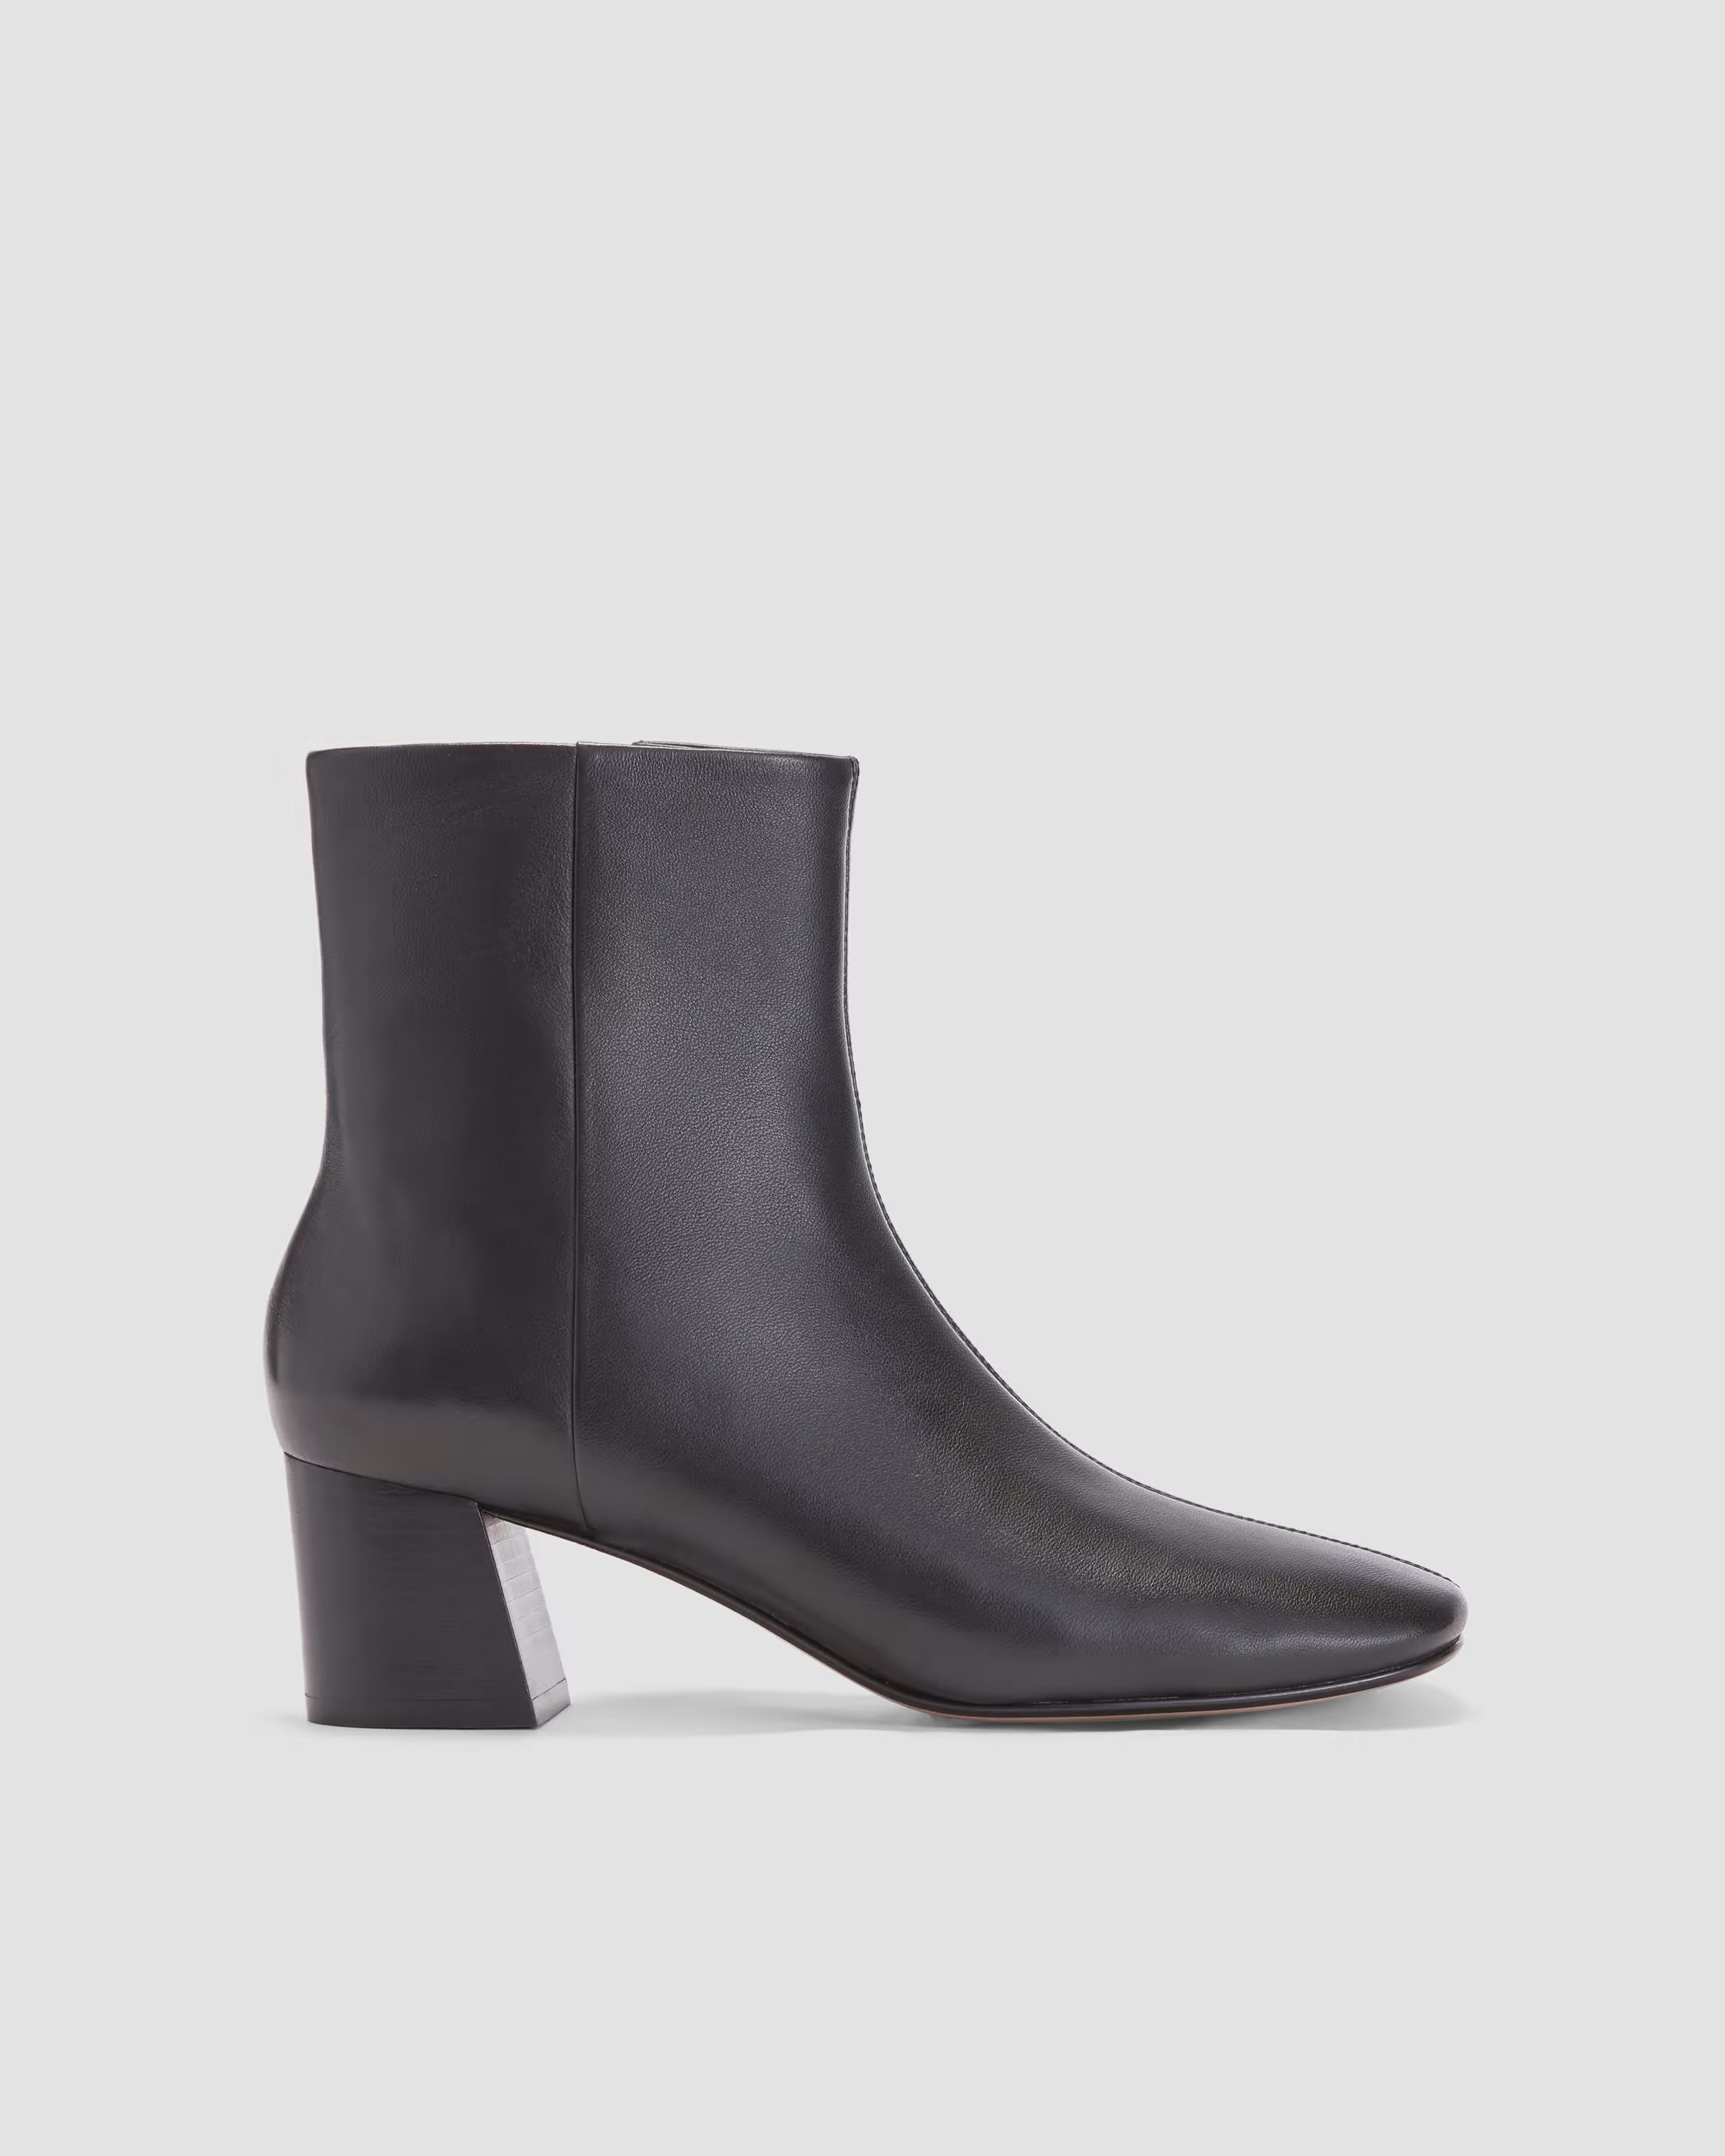 The Day Boot | Everlane